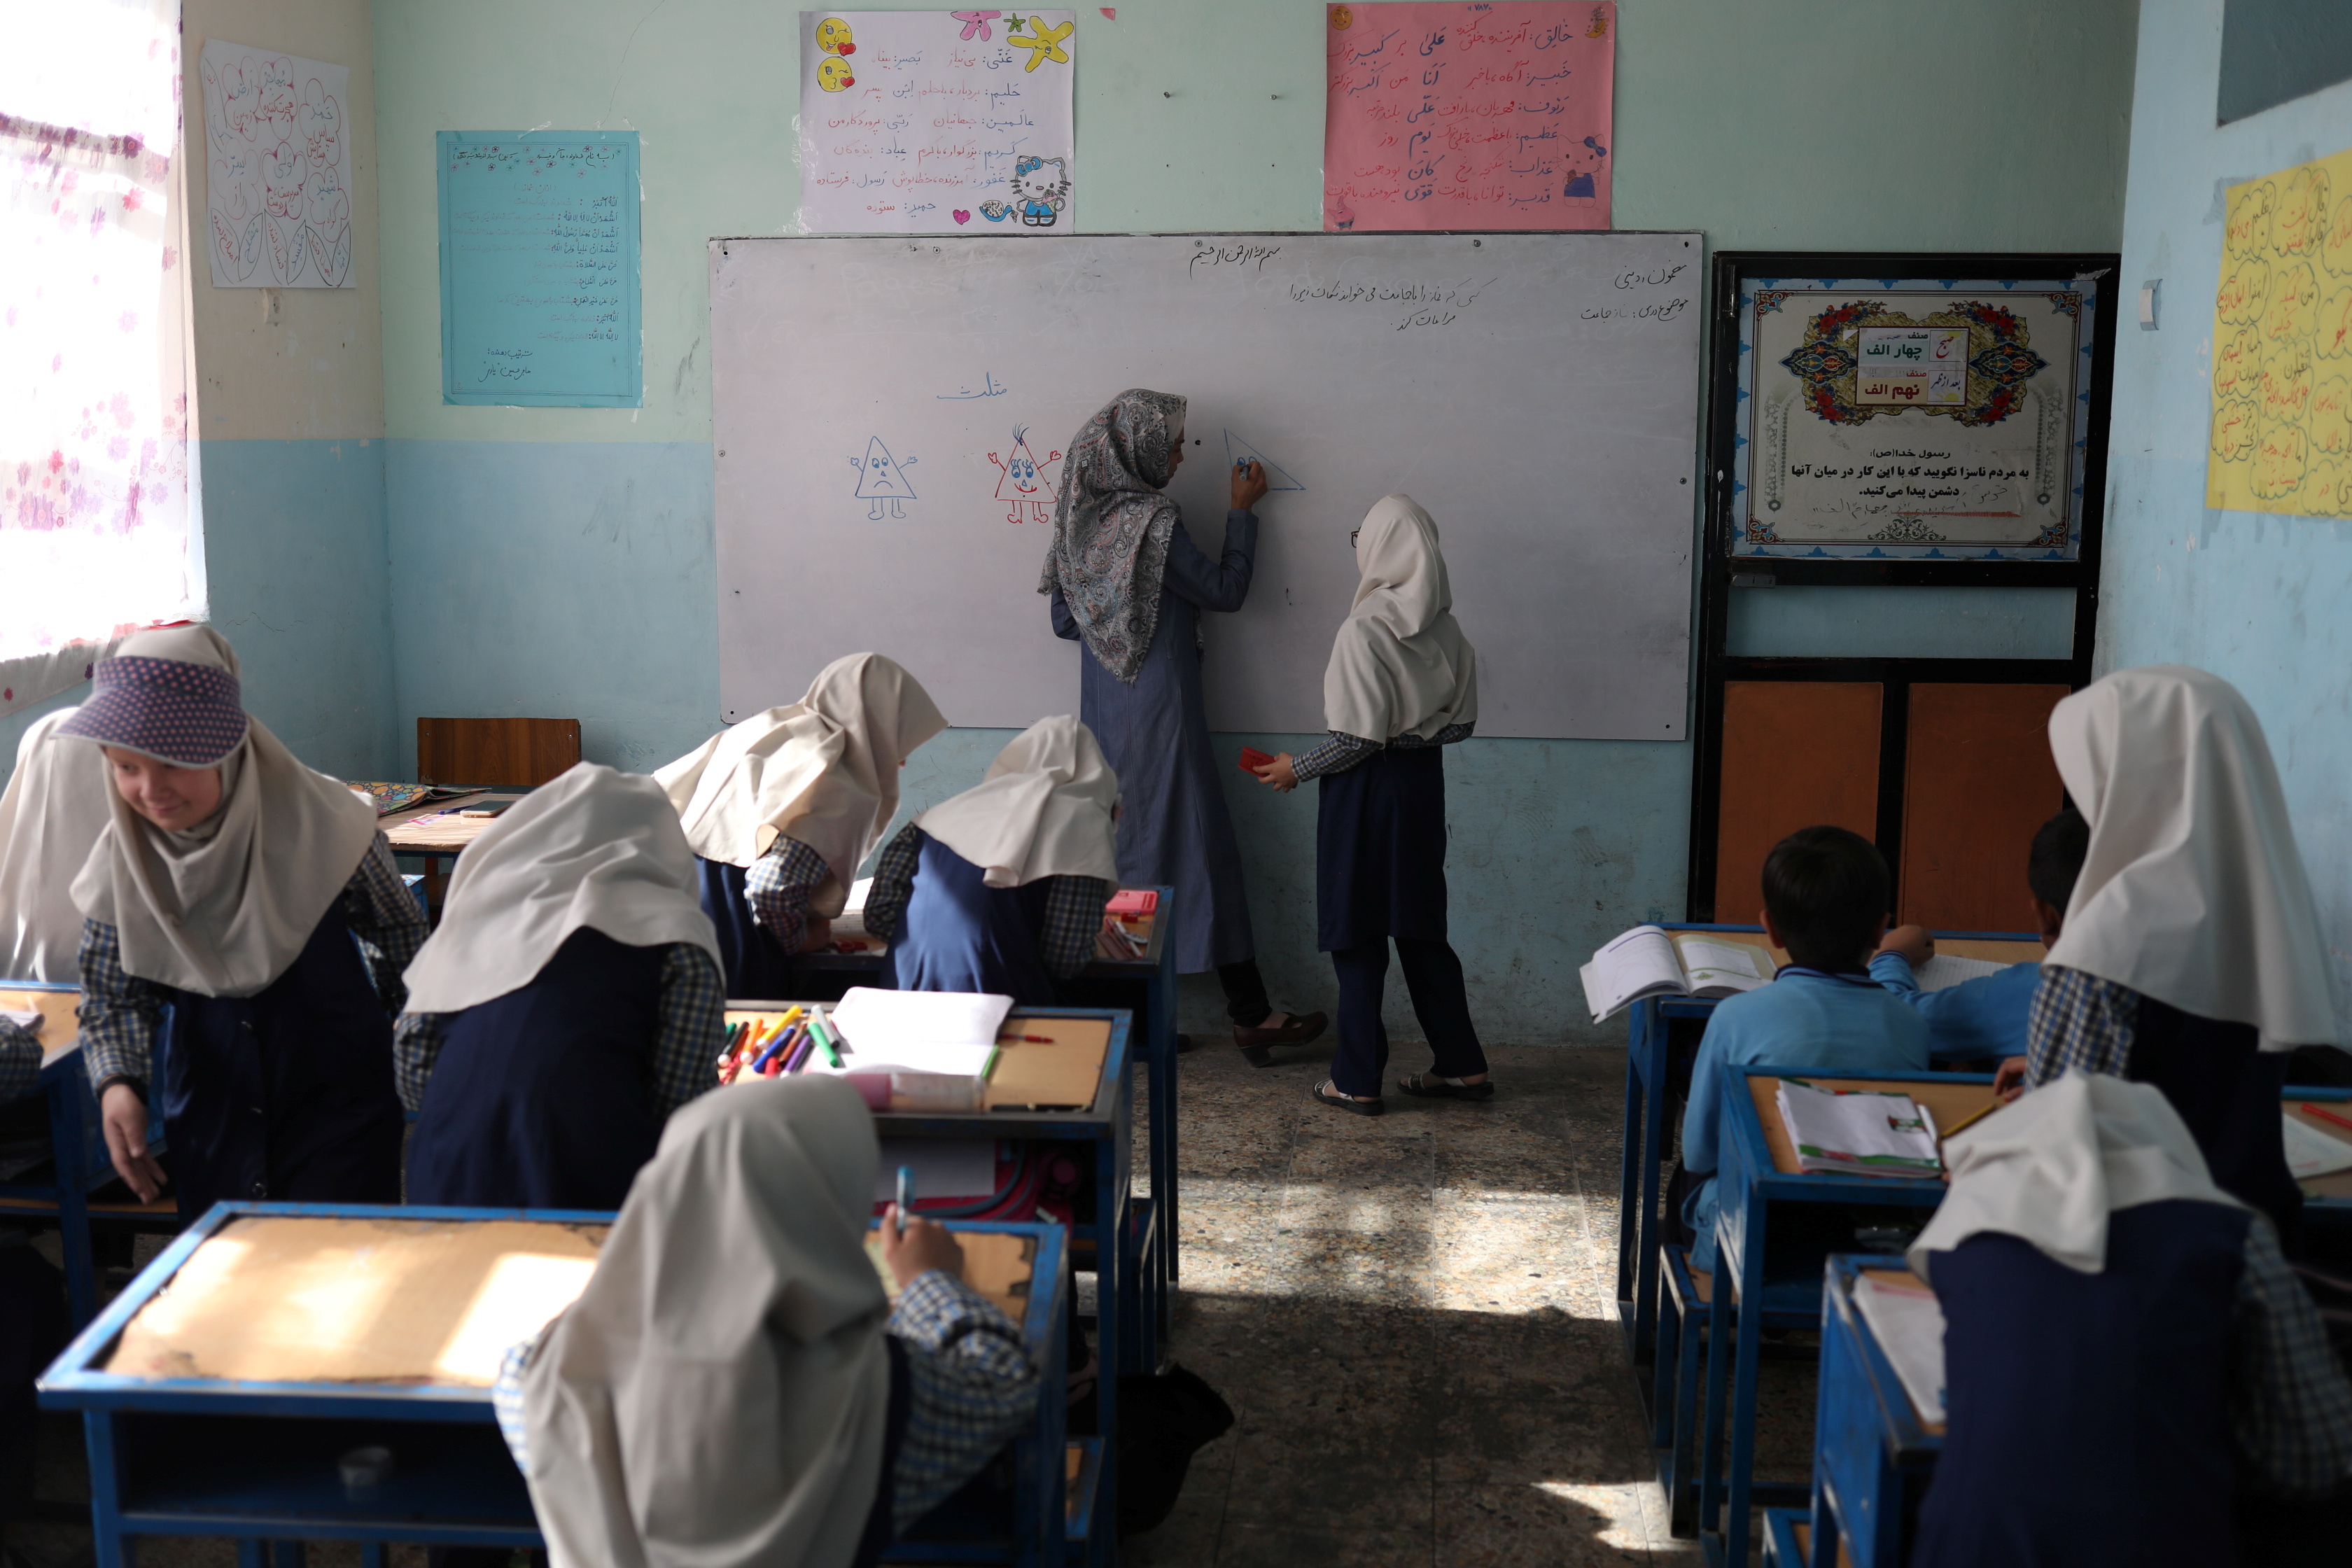 Afghan girls attend a class at a school in Kabul